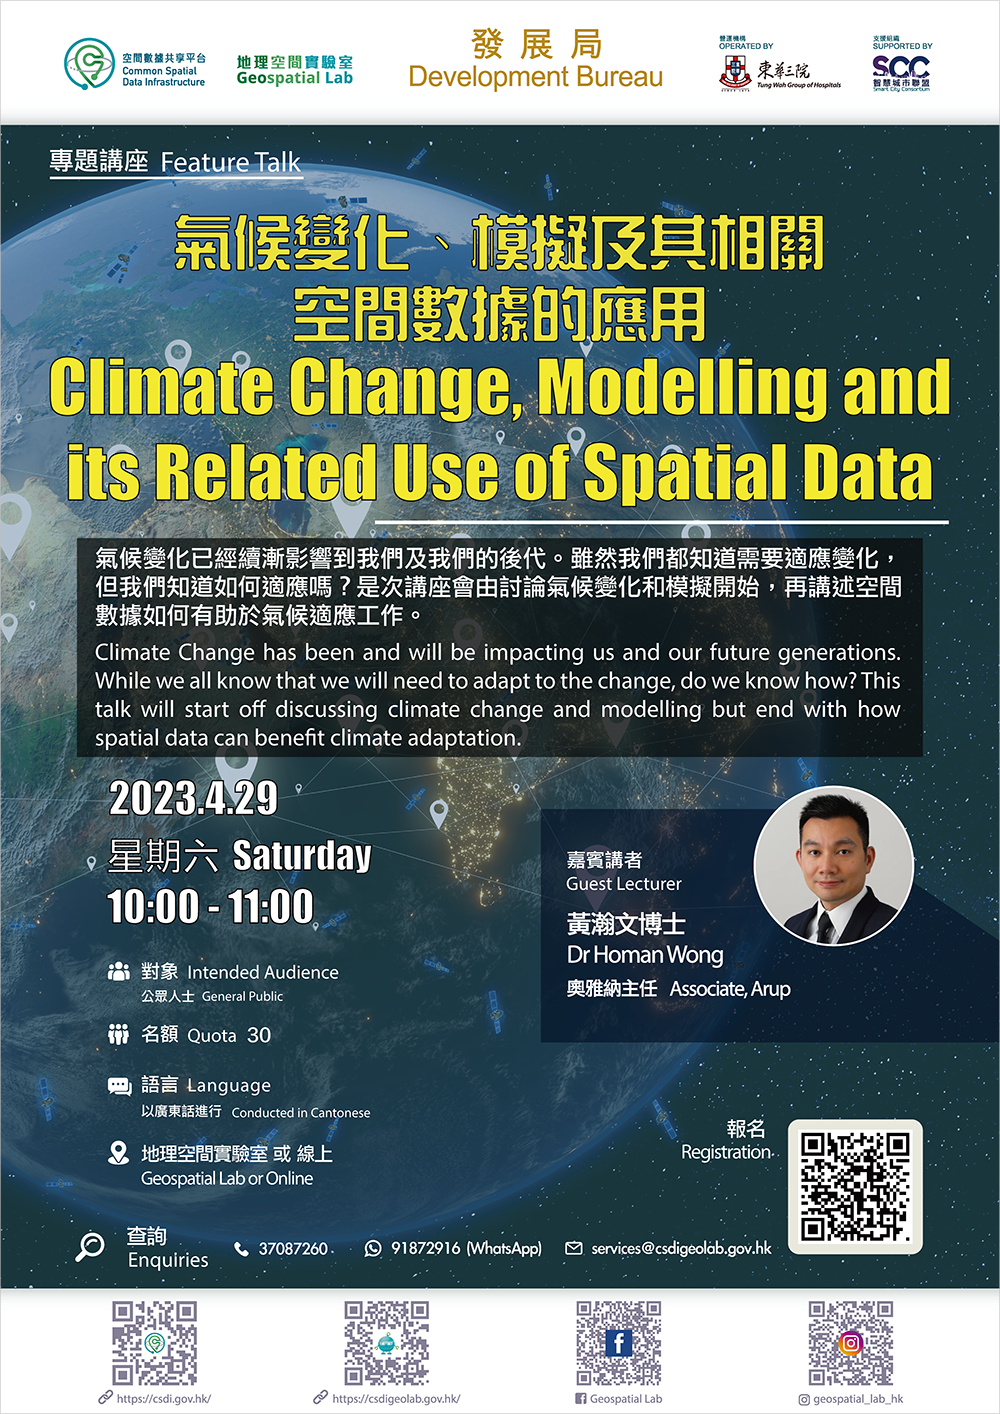 Feature Talk "Climate Change, Modelling and its Related Use of Spatial Data"